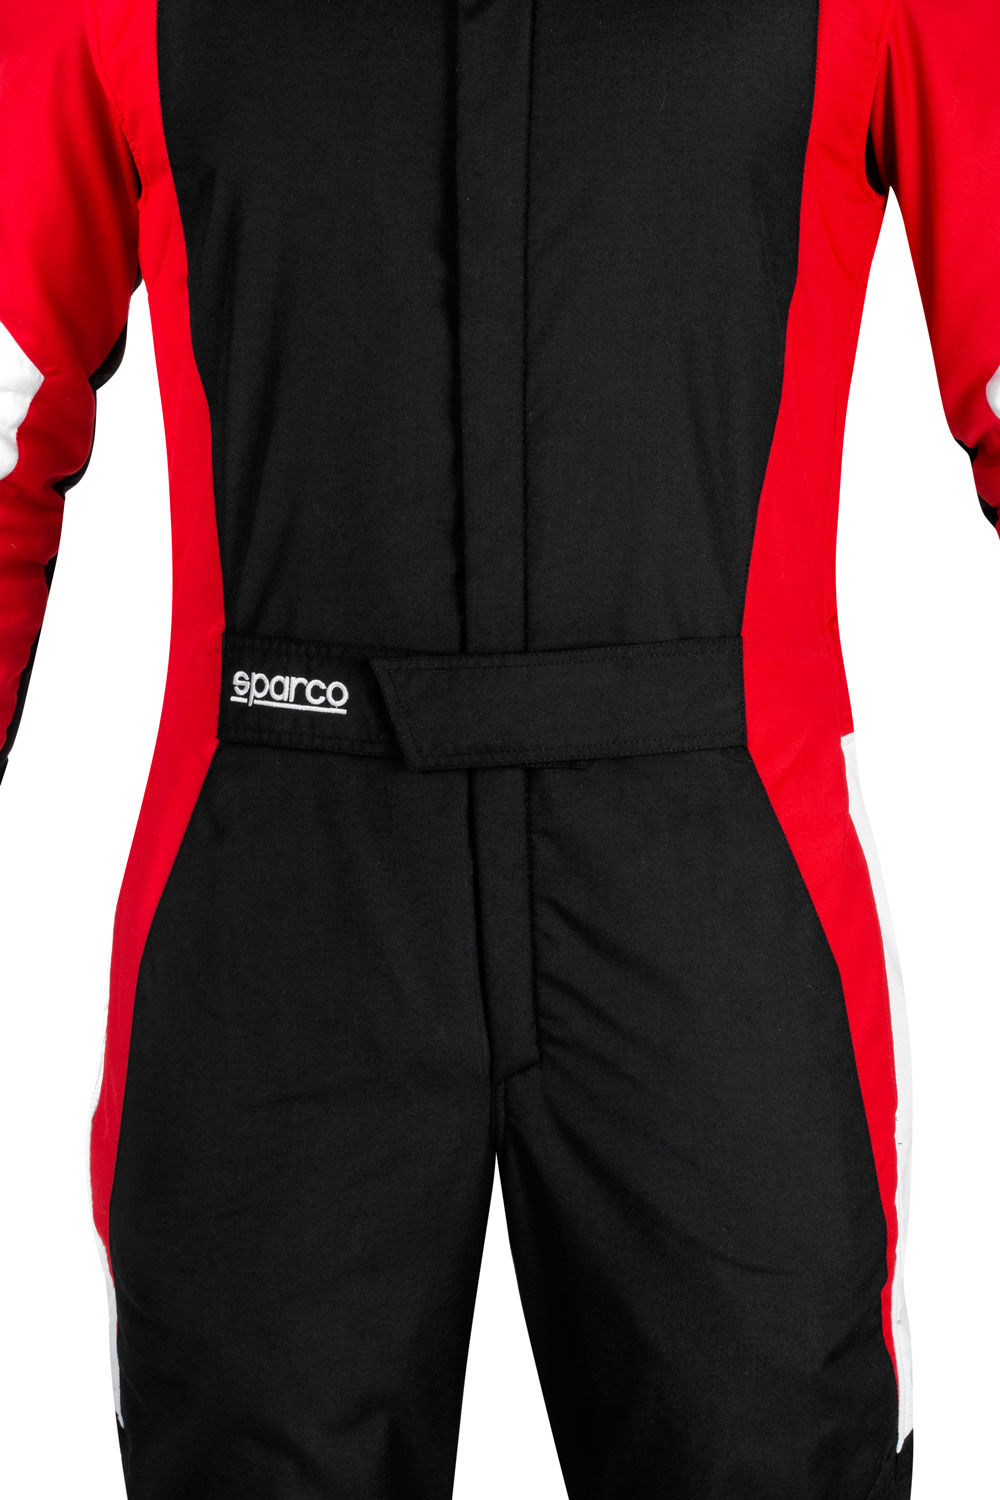 Sparco Rennoverall Competition Pro LADY, schwarz/rot